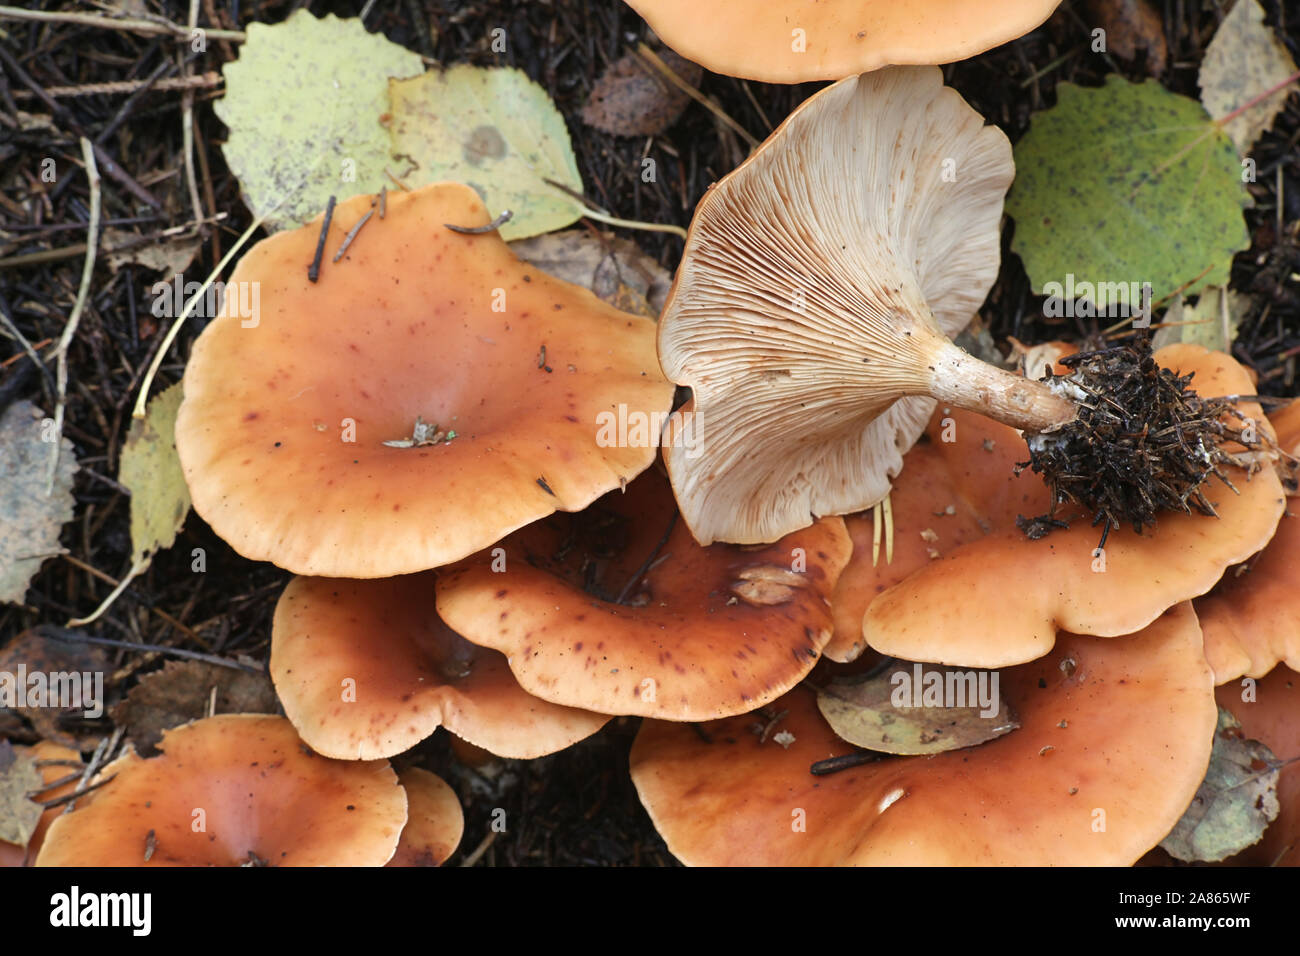 Paralepista flaccida, known as Tawny Funnel mushroom, growing on a ant nest in Finland Stock Photo